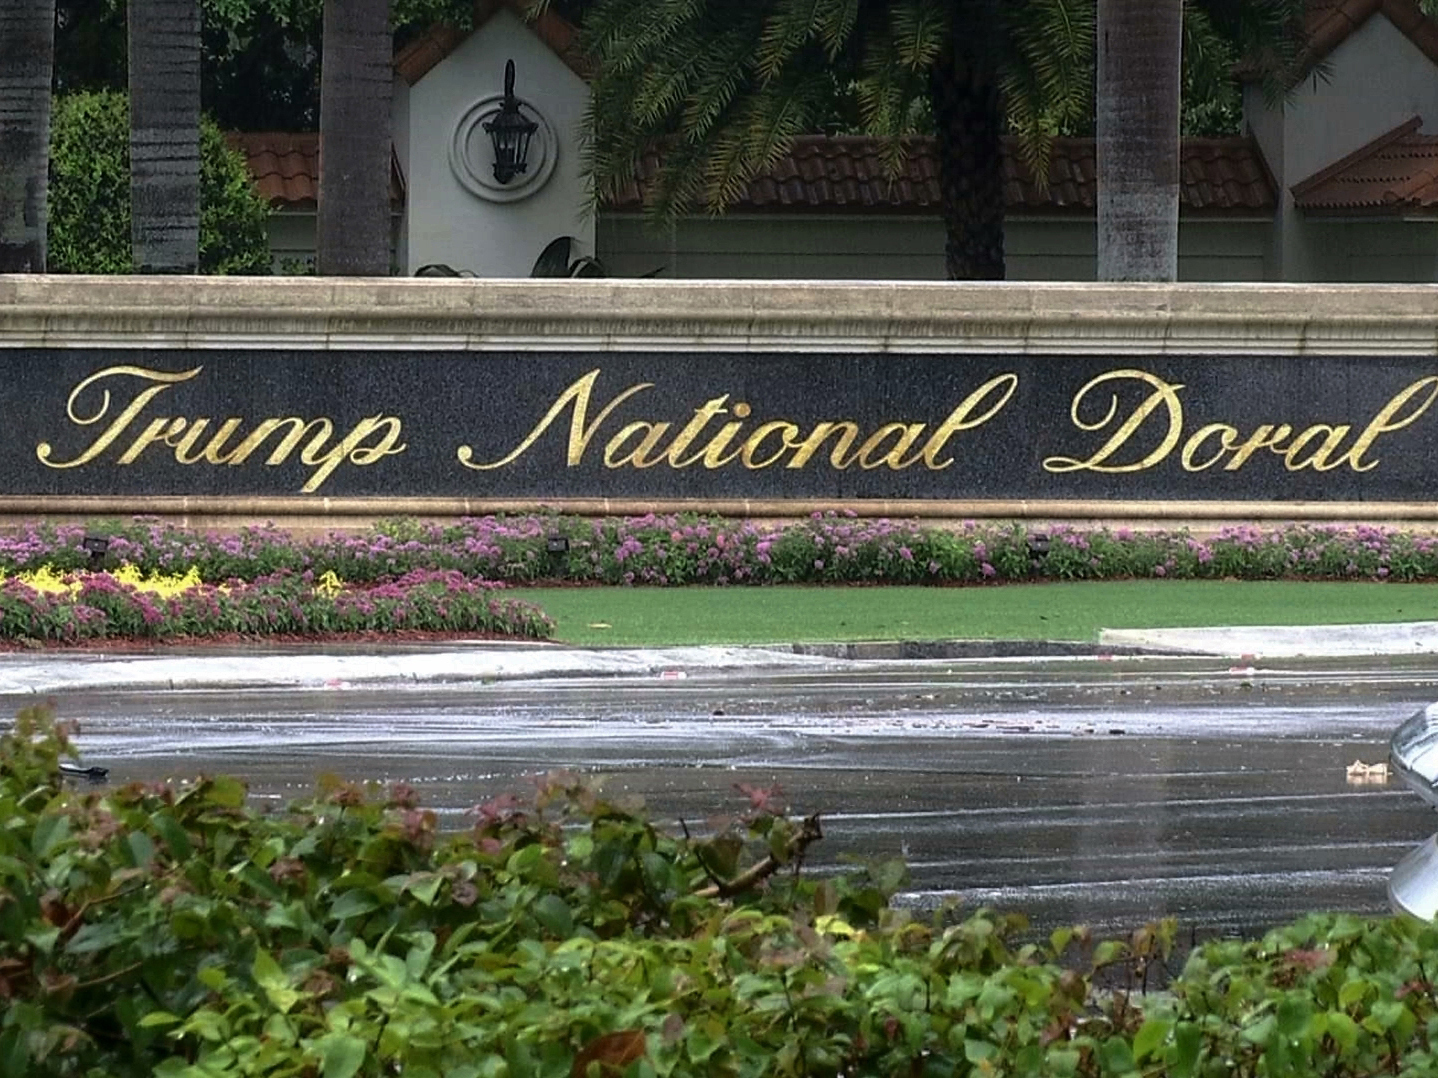 On Saturday, President Trump abandoned his plan to host the next G-7 summit at his golf resort in Doral, Fla.